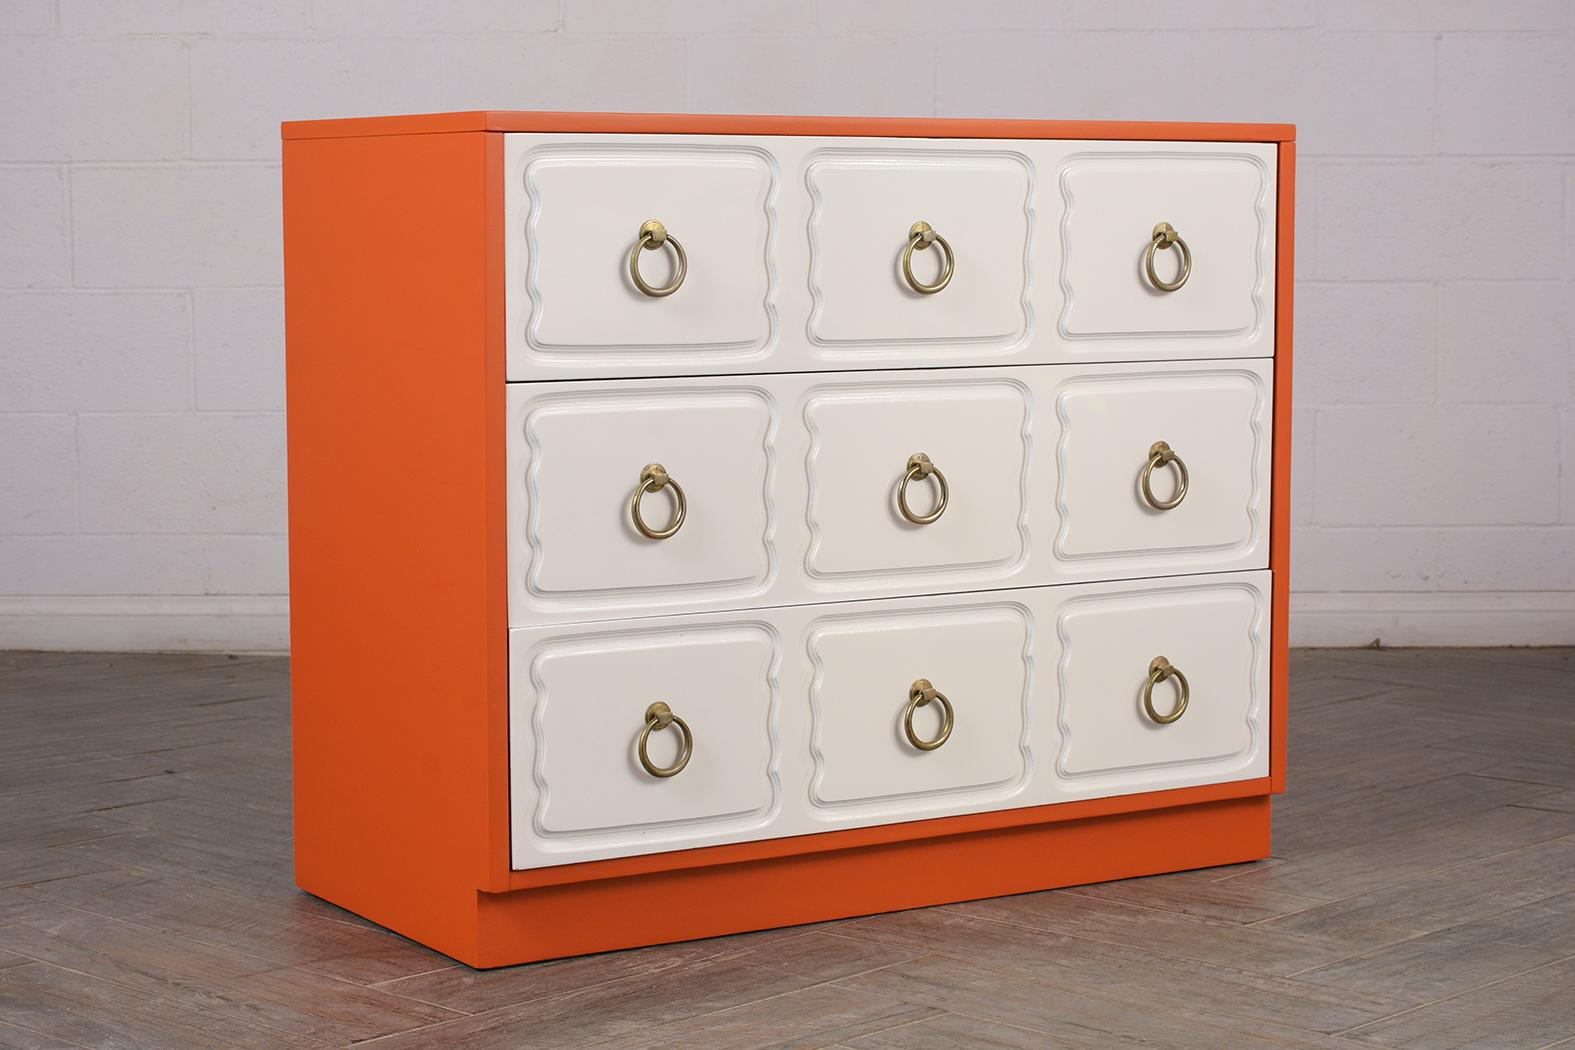 Hand-Crafted Three-Drawer Dorothy Draper Style Dresser with Lacquered Finish